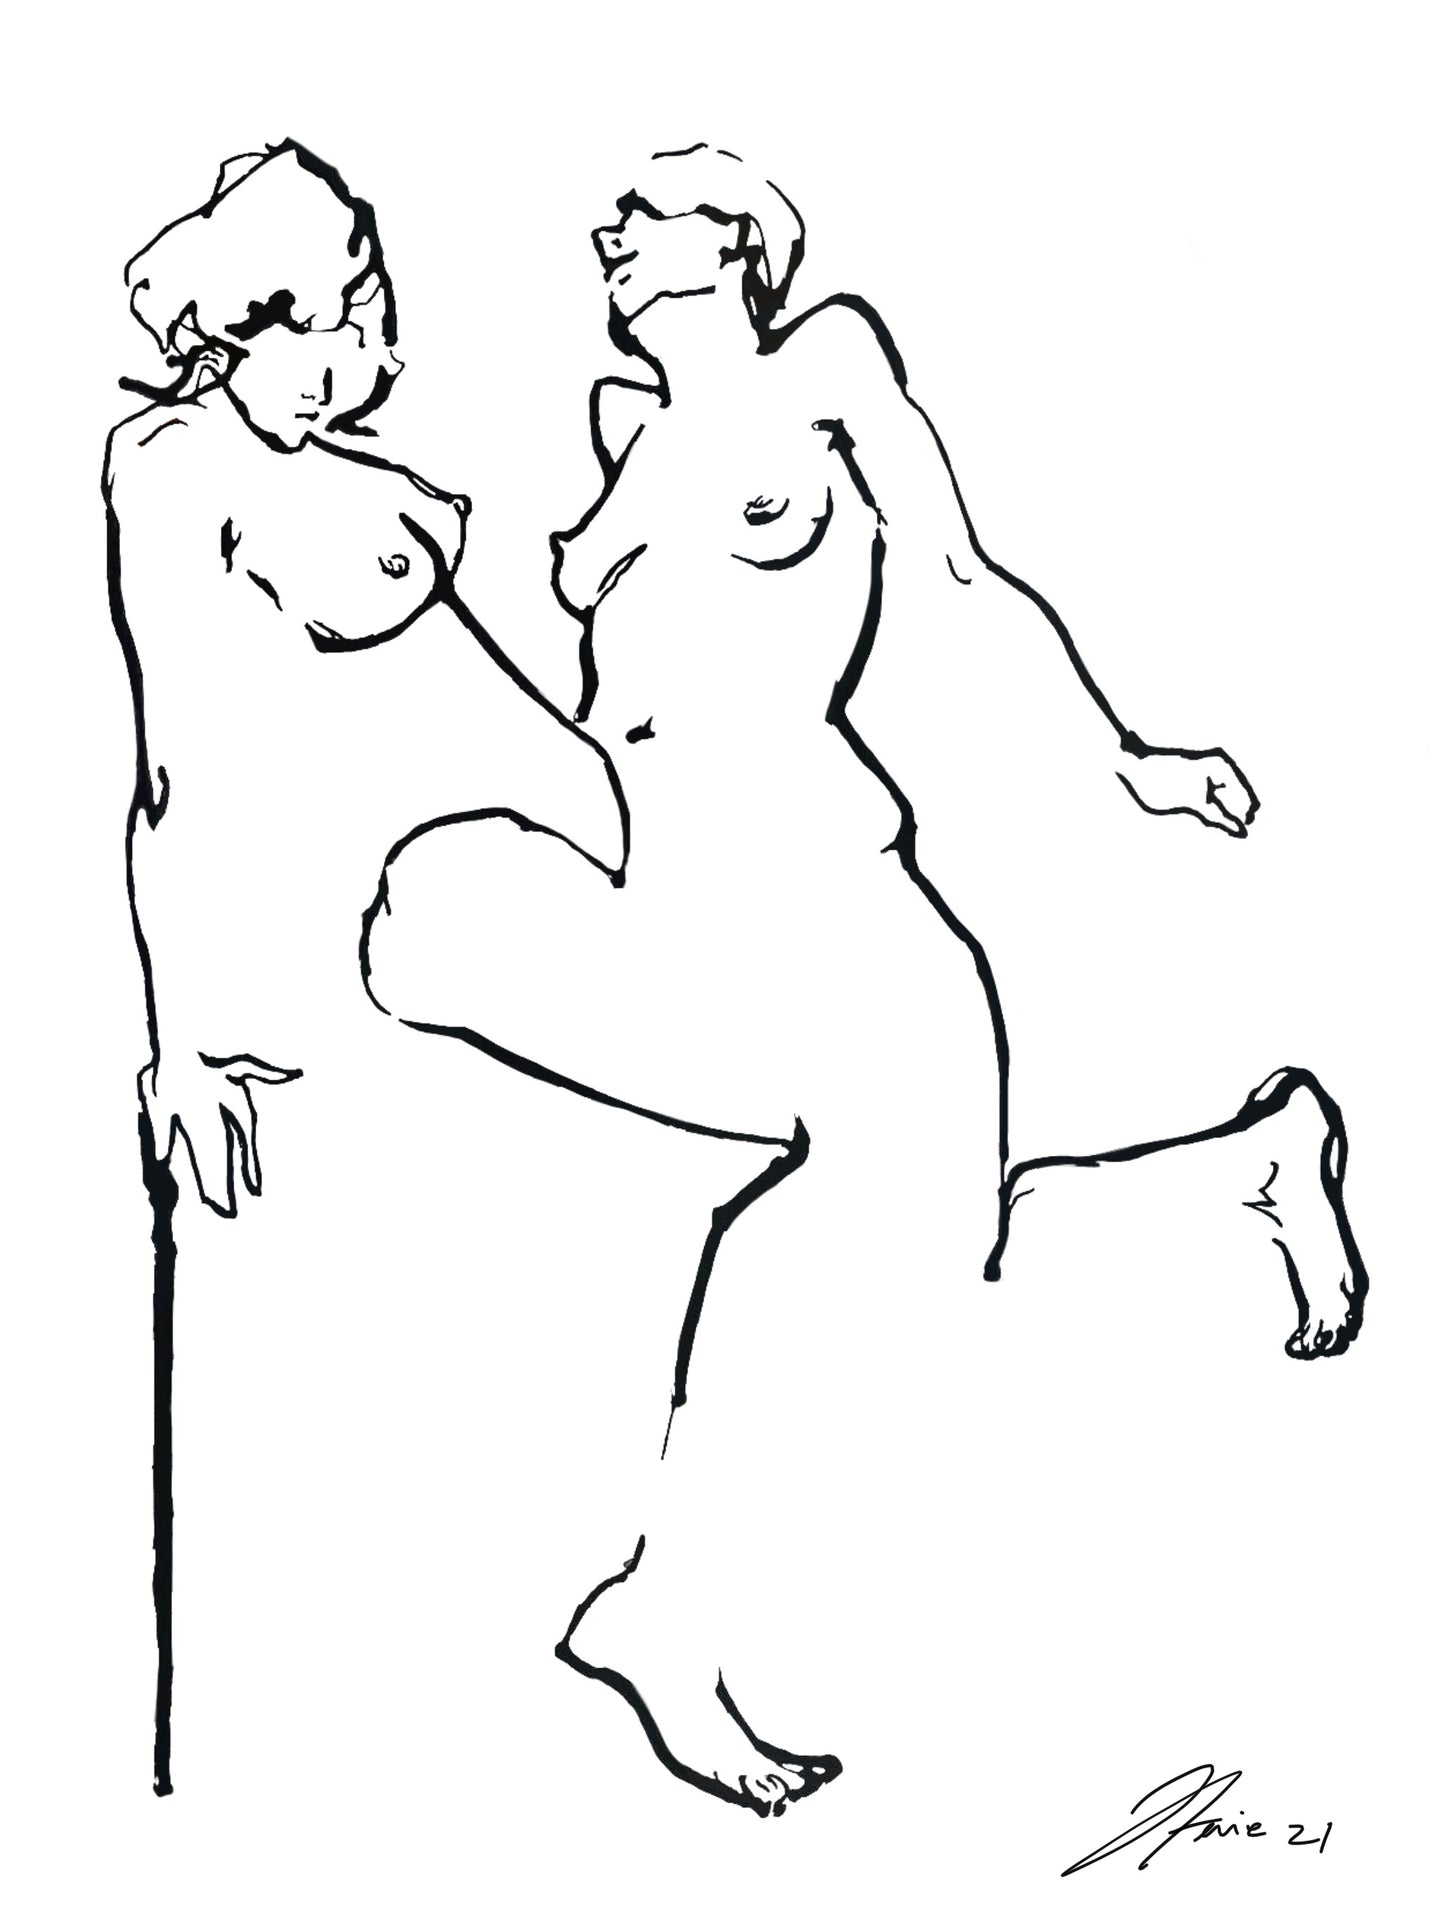 Two Figures Drip drawing PRINT